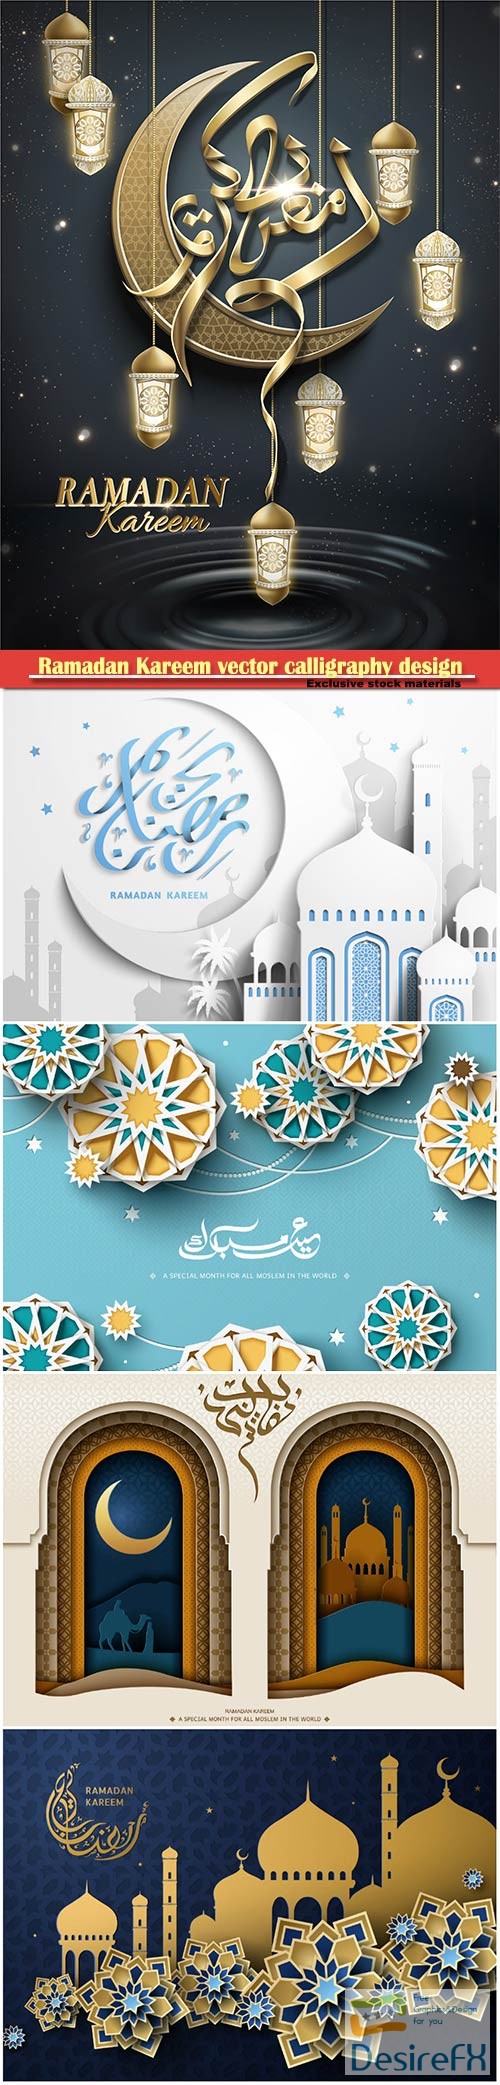 Ramadan Kareem vector calligraphy design with decorative floral pattern,mosque silhouette, crescent and glittering islamic background # 7